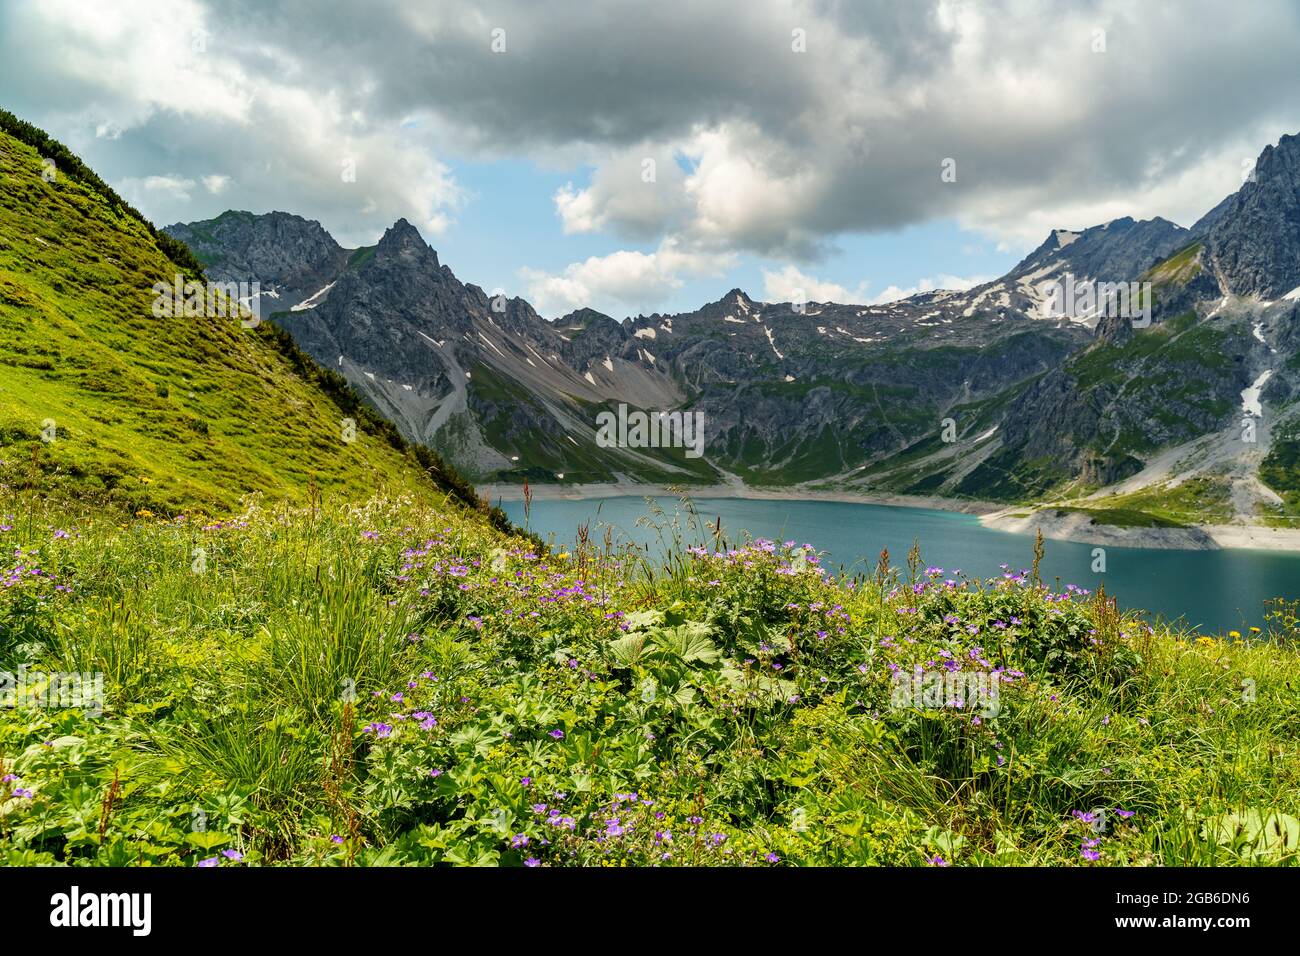 colored flowered meadows with daisies, alpine roses an other flowers. Brand valley reservoir with steep, stony mountains of Vorarlberg in background Stock Photo